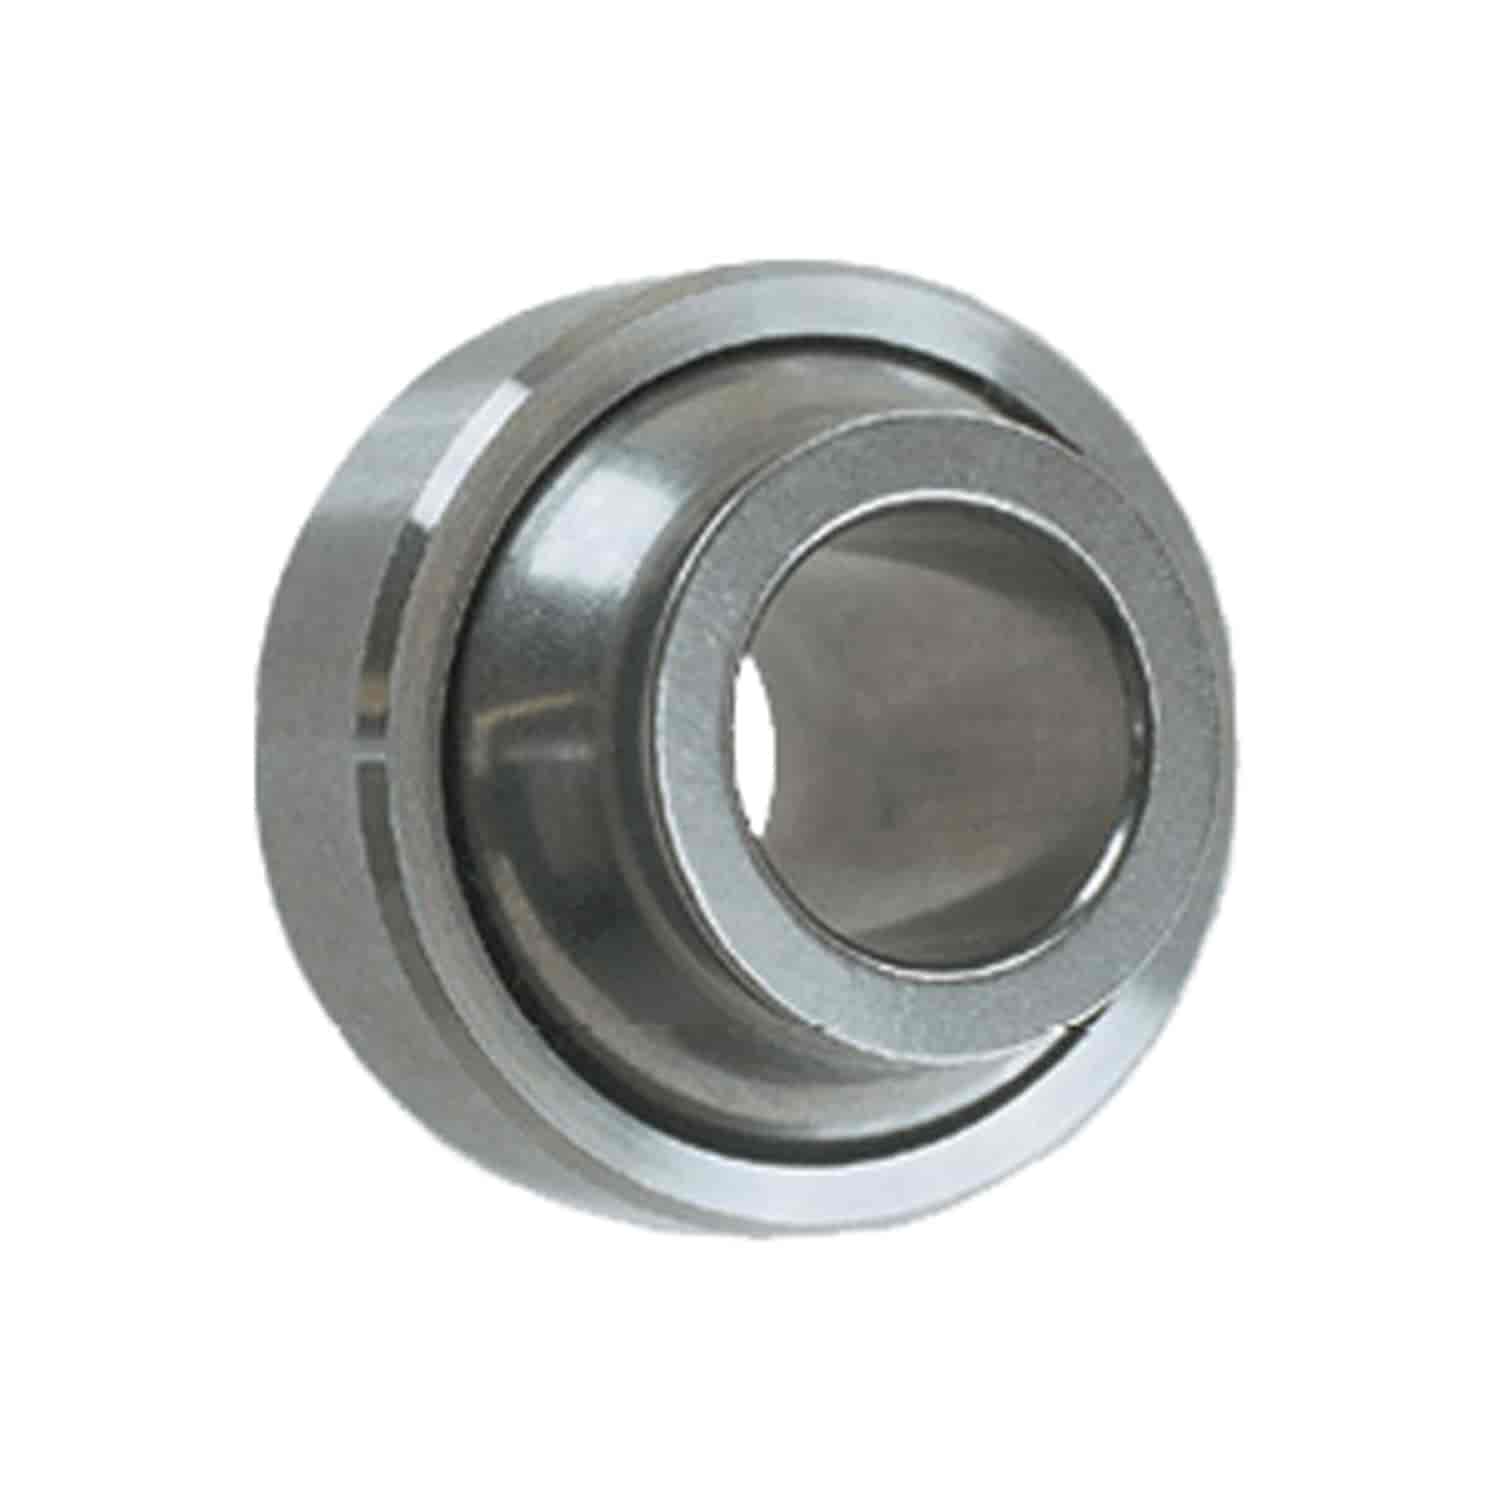 High Misalignment 440C SS Shperical Bearing Hole Size: 0.4375"